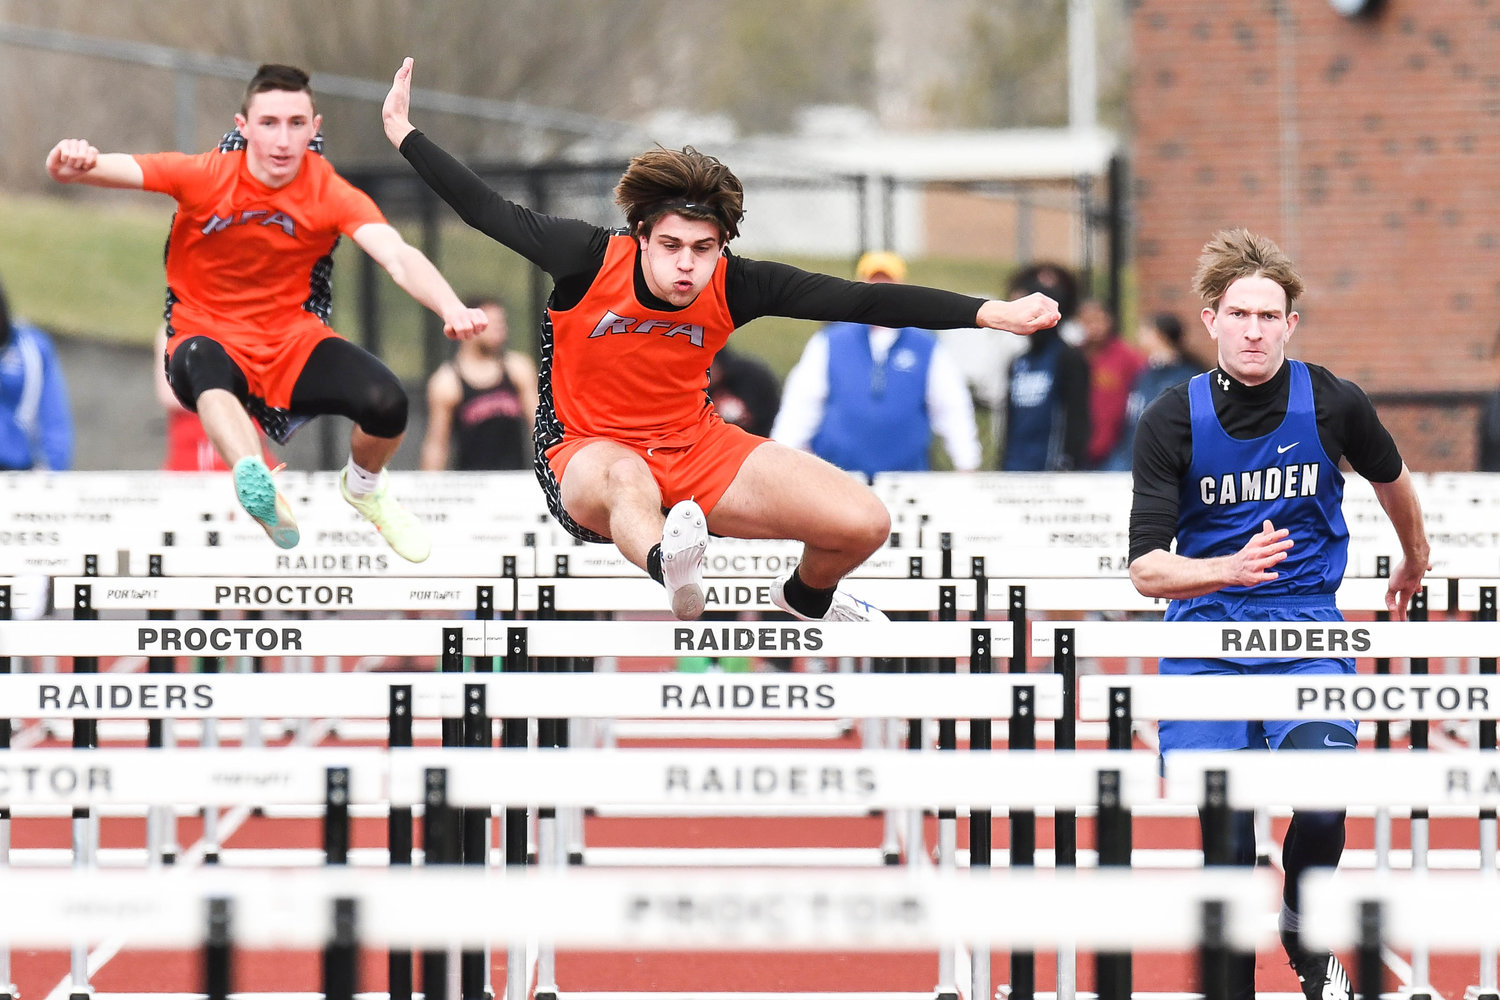 Rome Free Academy's Collin Gannon, center, competes in the 110-meter hurdle event during a track and field relay meet on Tuesday at PHS Stadium in Utica. RFA was third at the Tri-Valley League relay event behind Proctor and Camden.